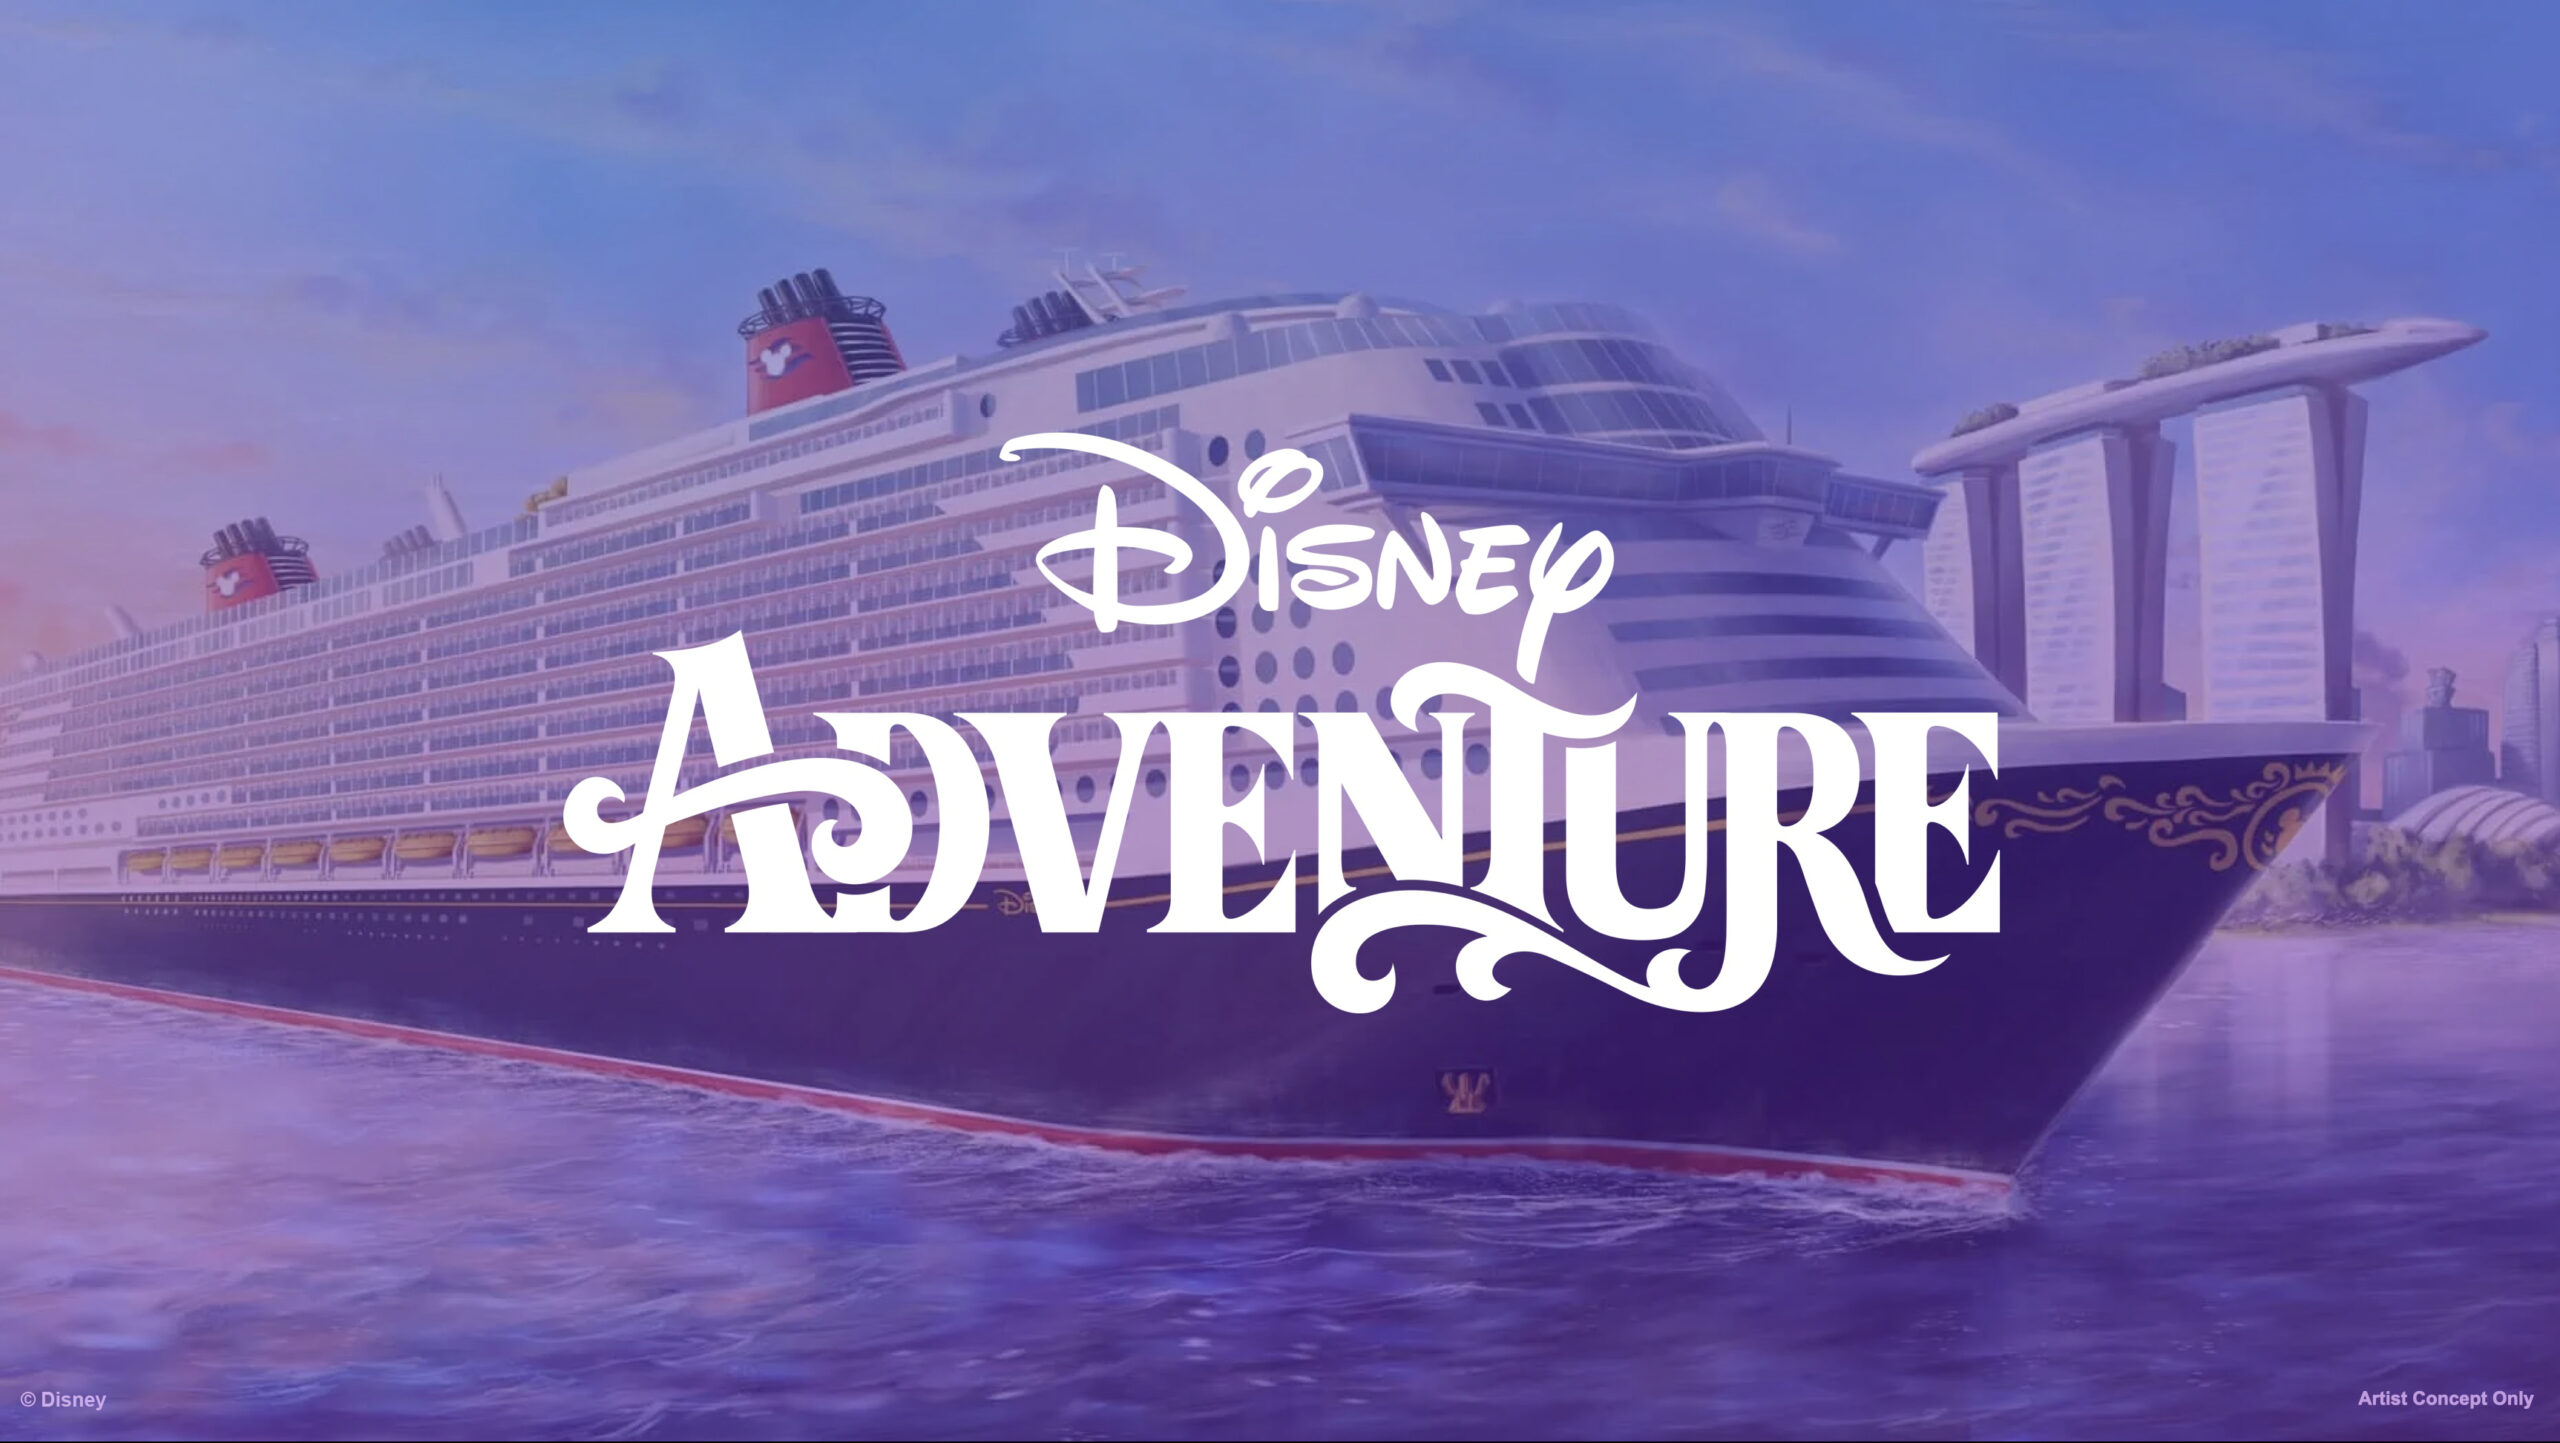 Disney Adventure is the seventh ship in the Disney Cruise Line fleet and work is currently underway in Germany. It’ll be the first Disney ship to sail from Singapore and throughout Southeast Asia and feature the Disney service, storytelling and entertainment everyone knows and loves.